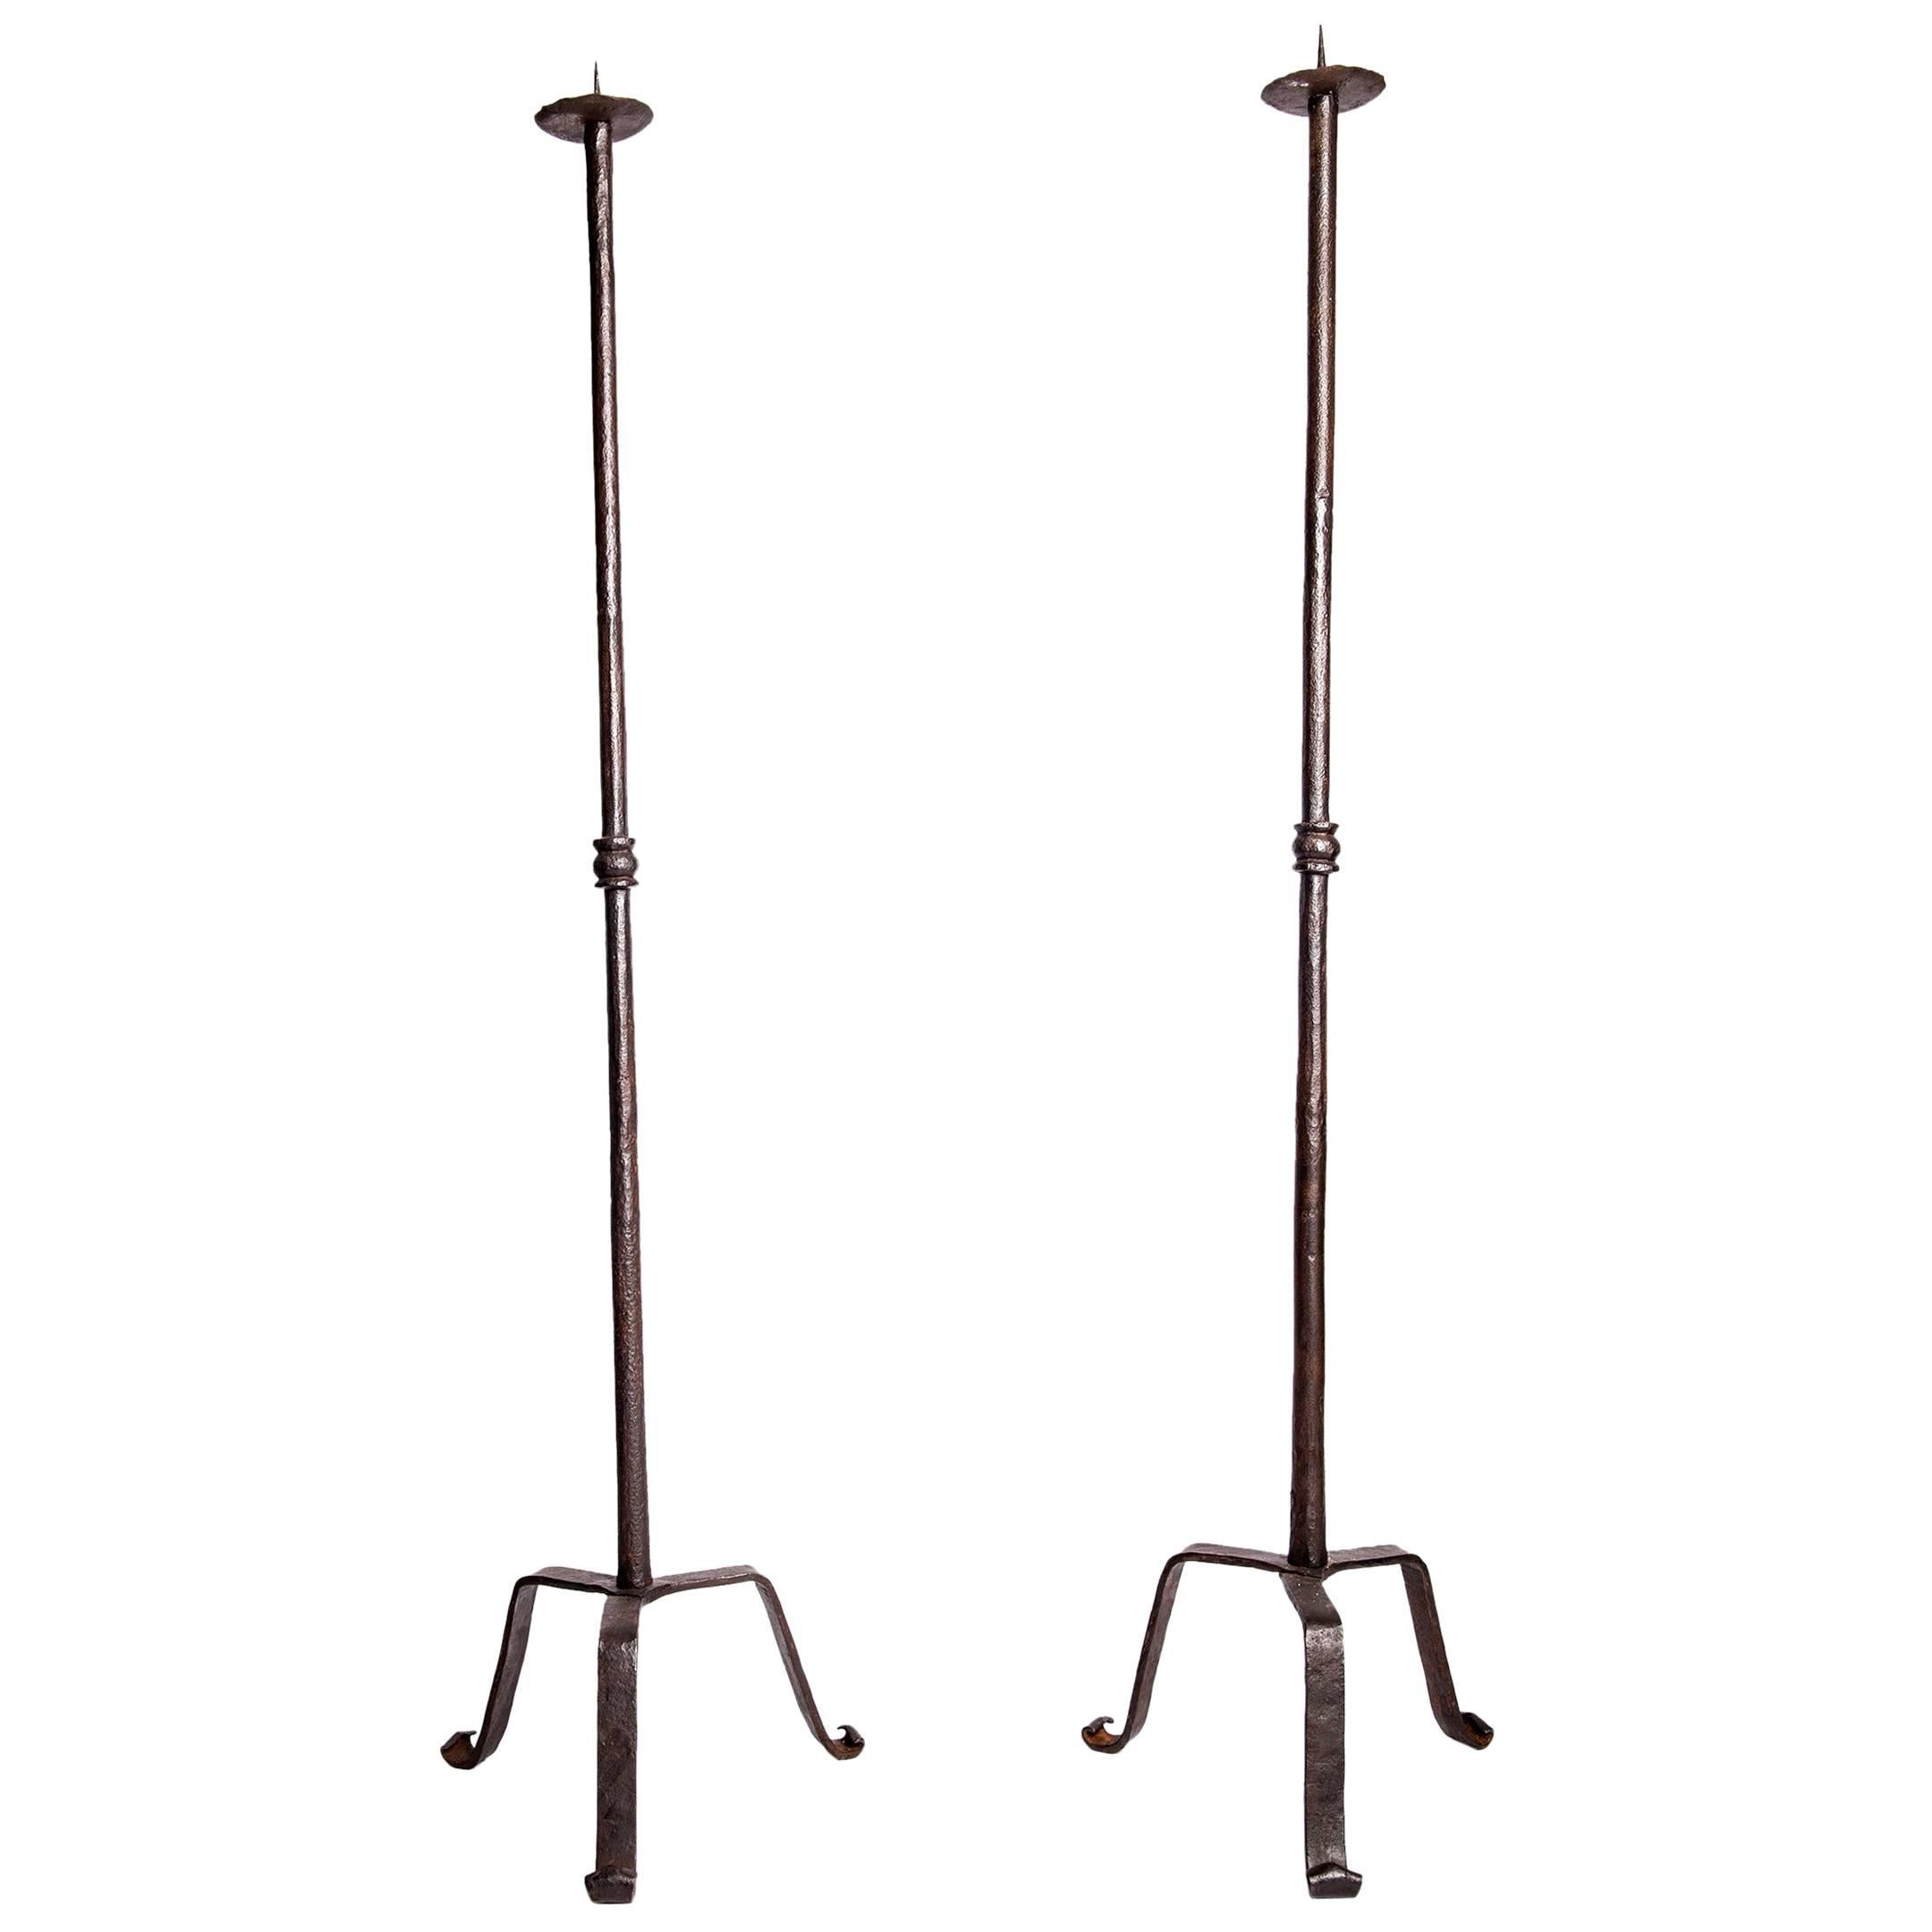 Pair of Wrought Iron Floor Standing Prickets from Umbria, 16th Century